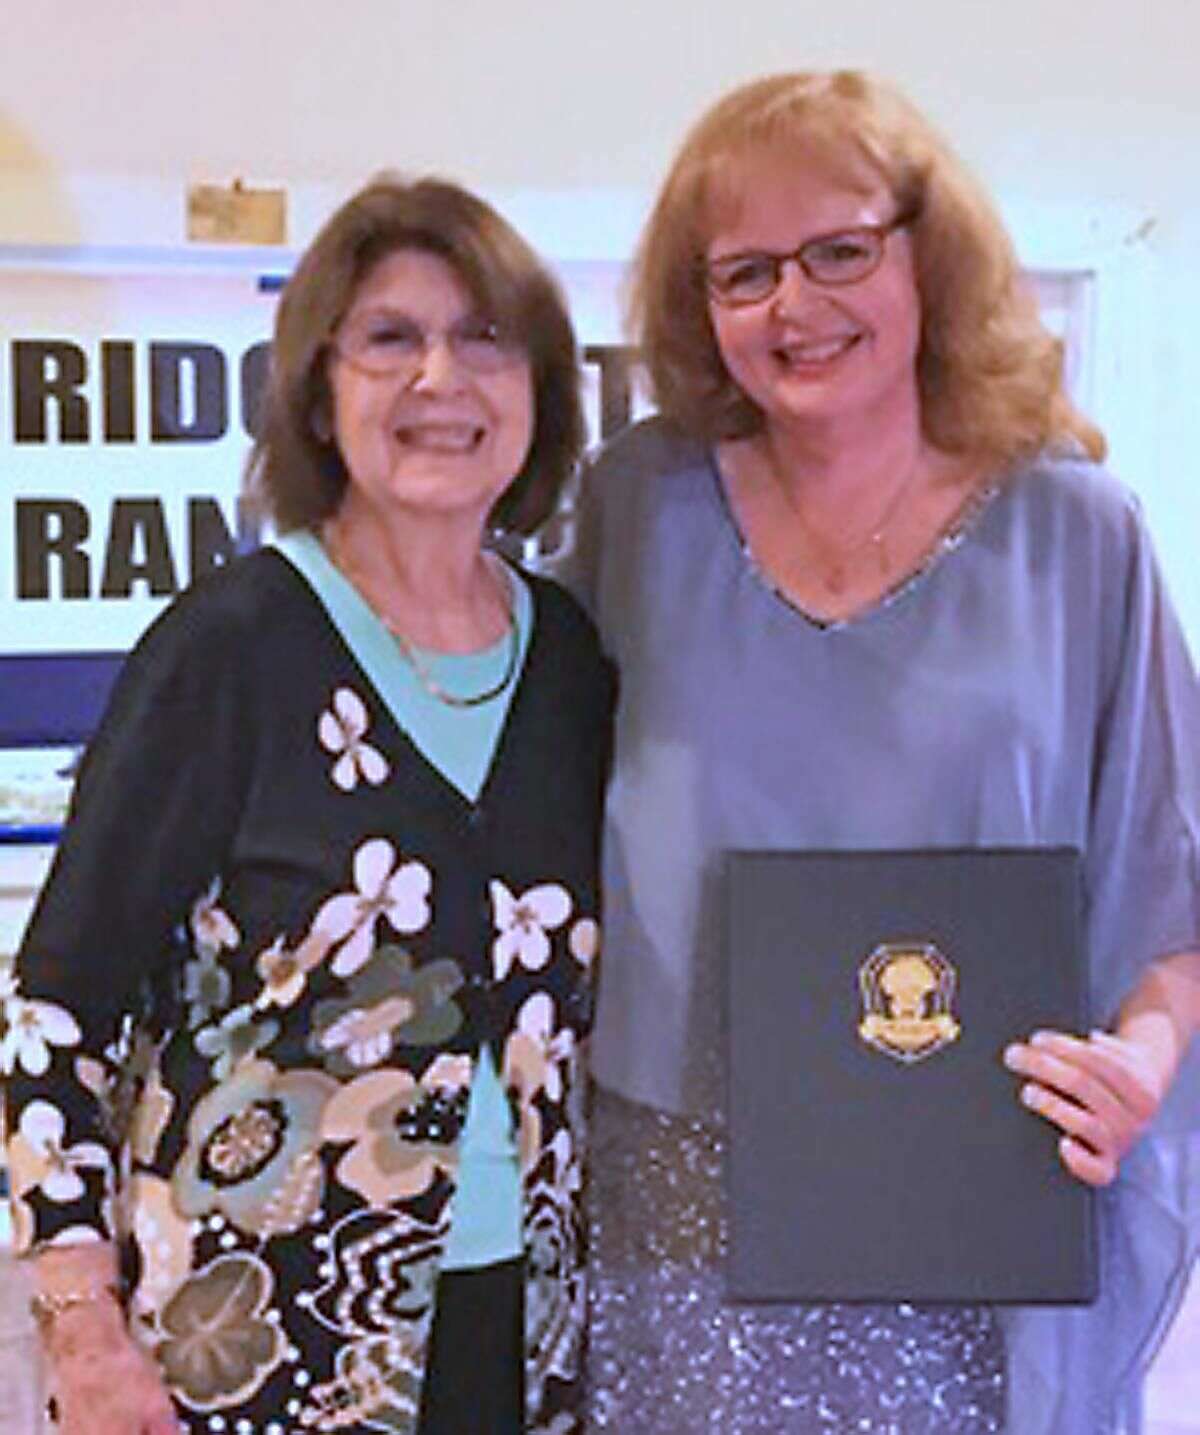 Nancy Mascio of the Bridgewater Grange recently presented a Community Service Award to Carol Wilbur. The award is an annual event done every April and recognizes individuals or groups that perform outstanding volunteer work for the community. Carol is very busy as a leader at Saint Marks Church. She was a warden and the treasurer. Carol does flower arrangements and schedules the duties for worship services. She organizes and cooks for church dinners and helps with other church events. For the Bridgewater Auxiliary, Carol has been the membership chairperson, vice president and president. She is active on the scholarship committee.